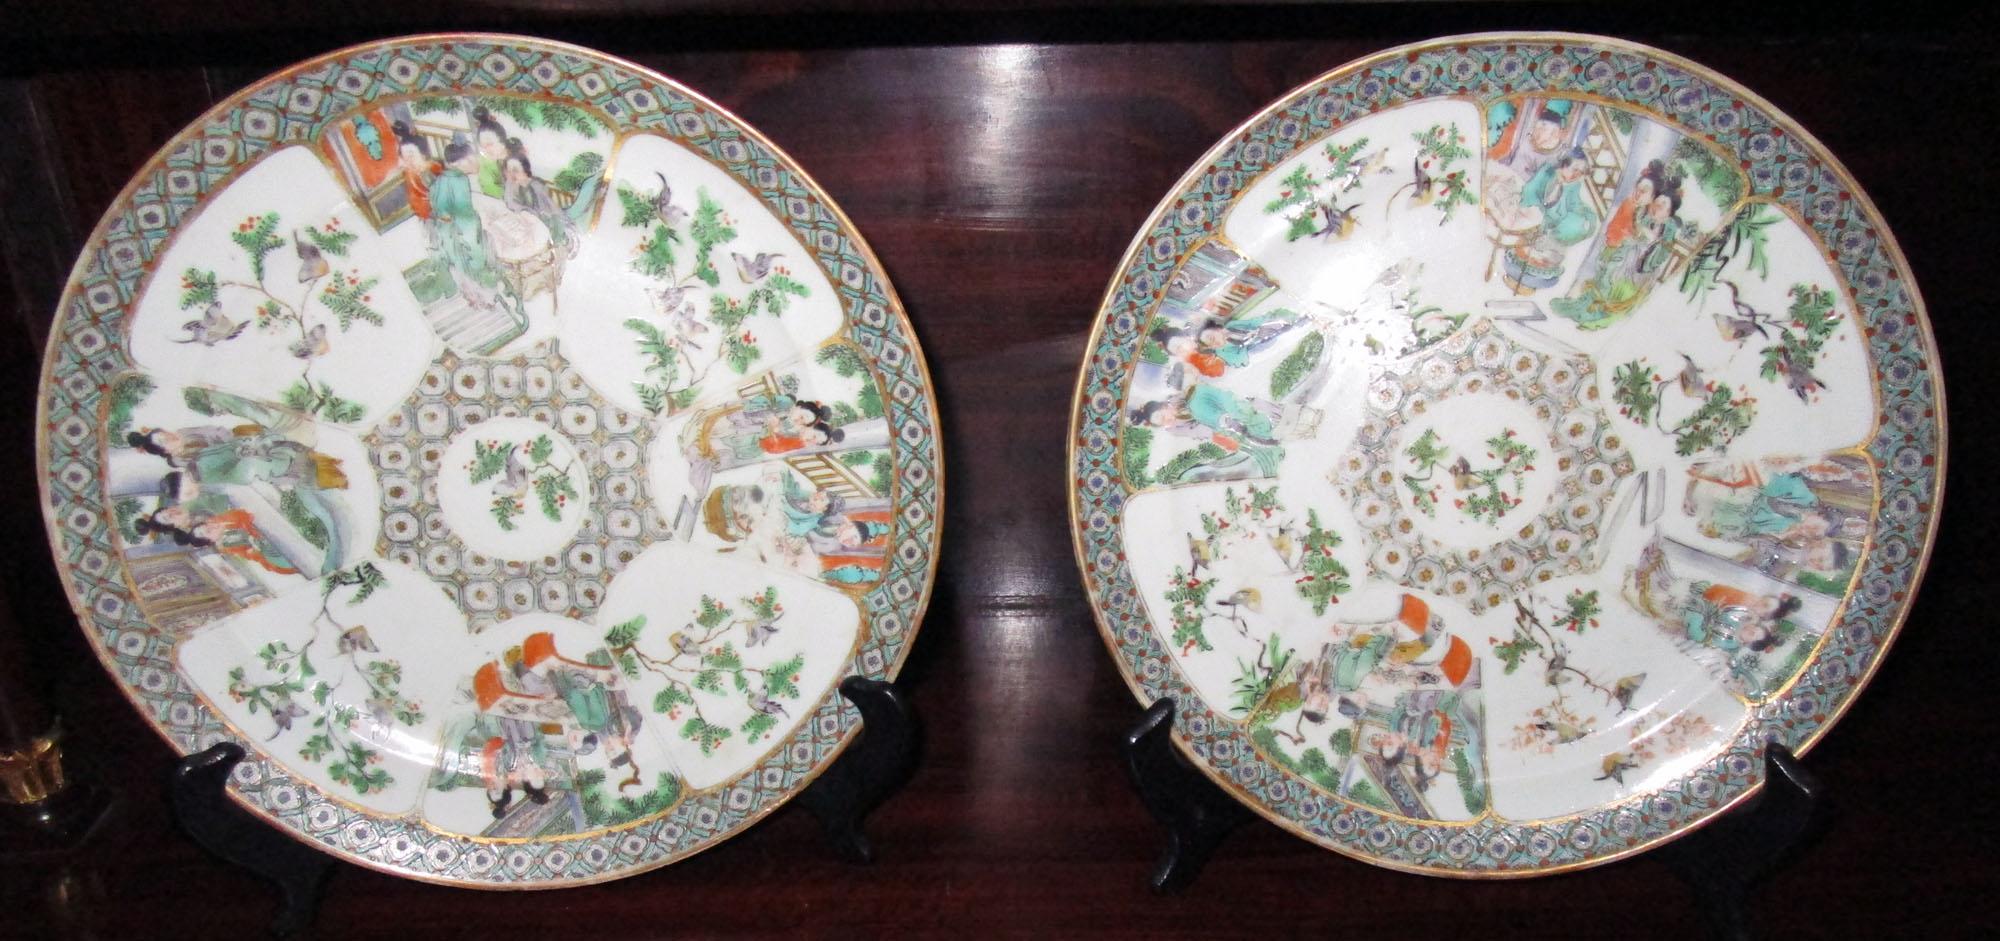 19th century Rose Medallion Chinese Export Plate Set of Two 1